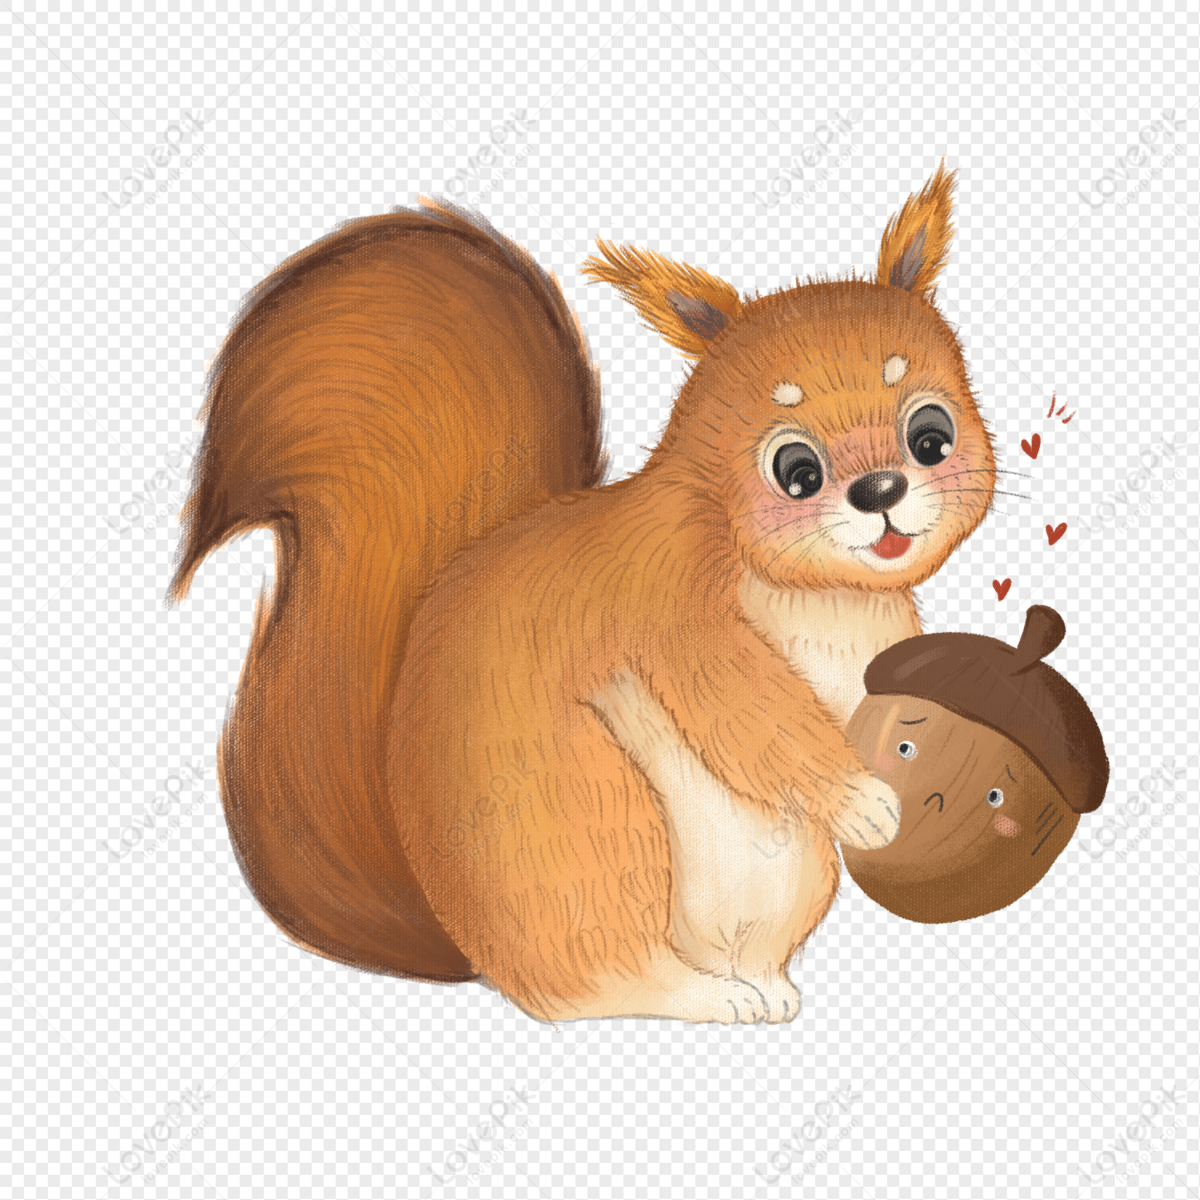 Cute Squirrel Material PNG Transparent Background And Clipart Image For  Free Download - Lovepik | 401522580